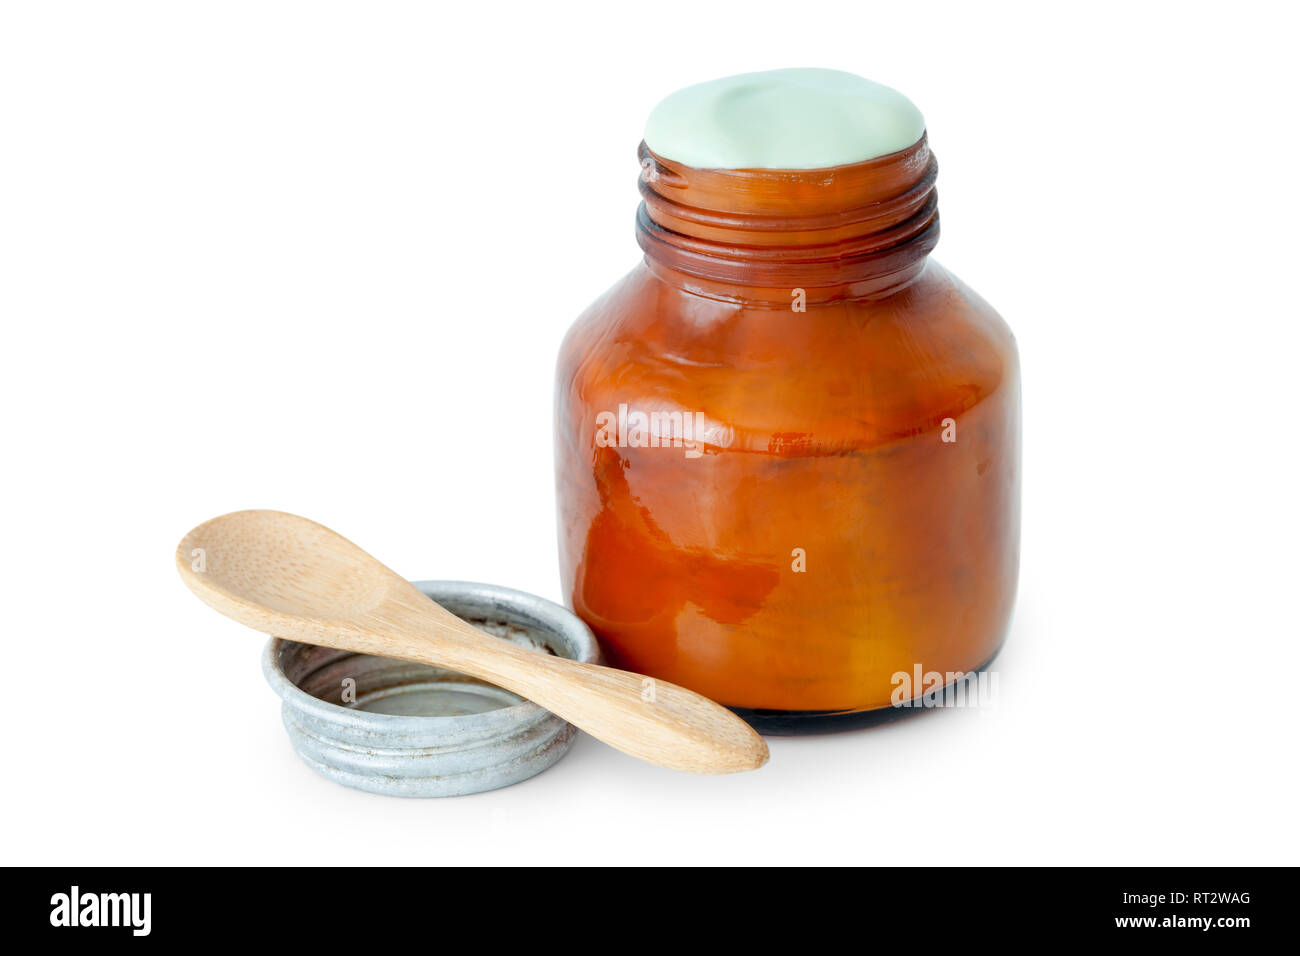 A balm jar full of medicated ointment in green color and spoon on white background. Stock Photo